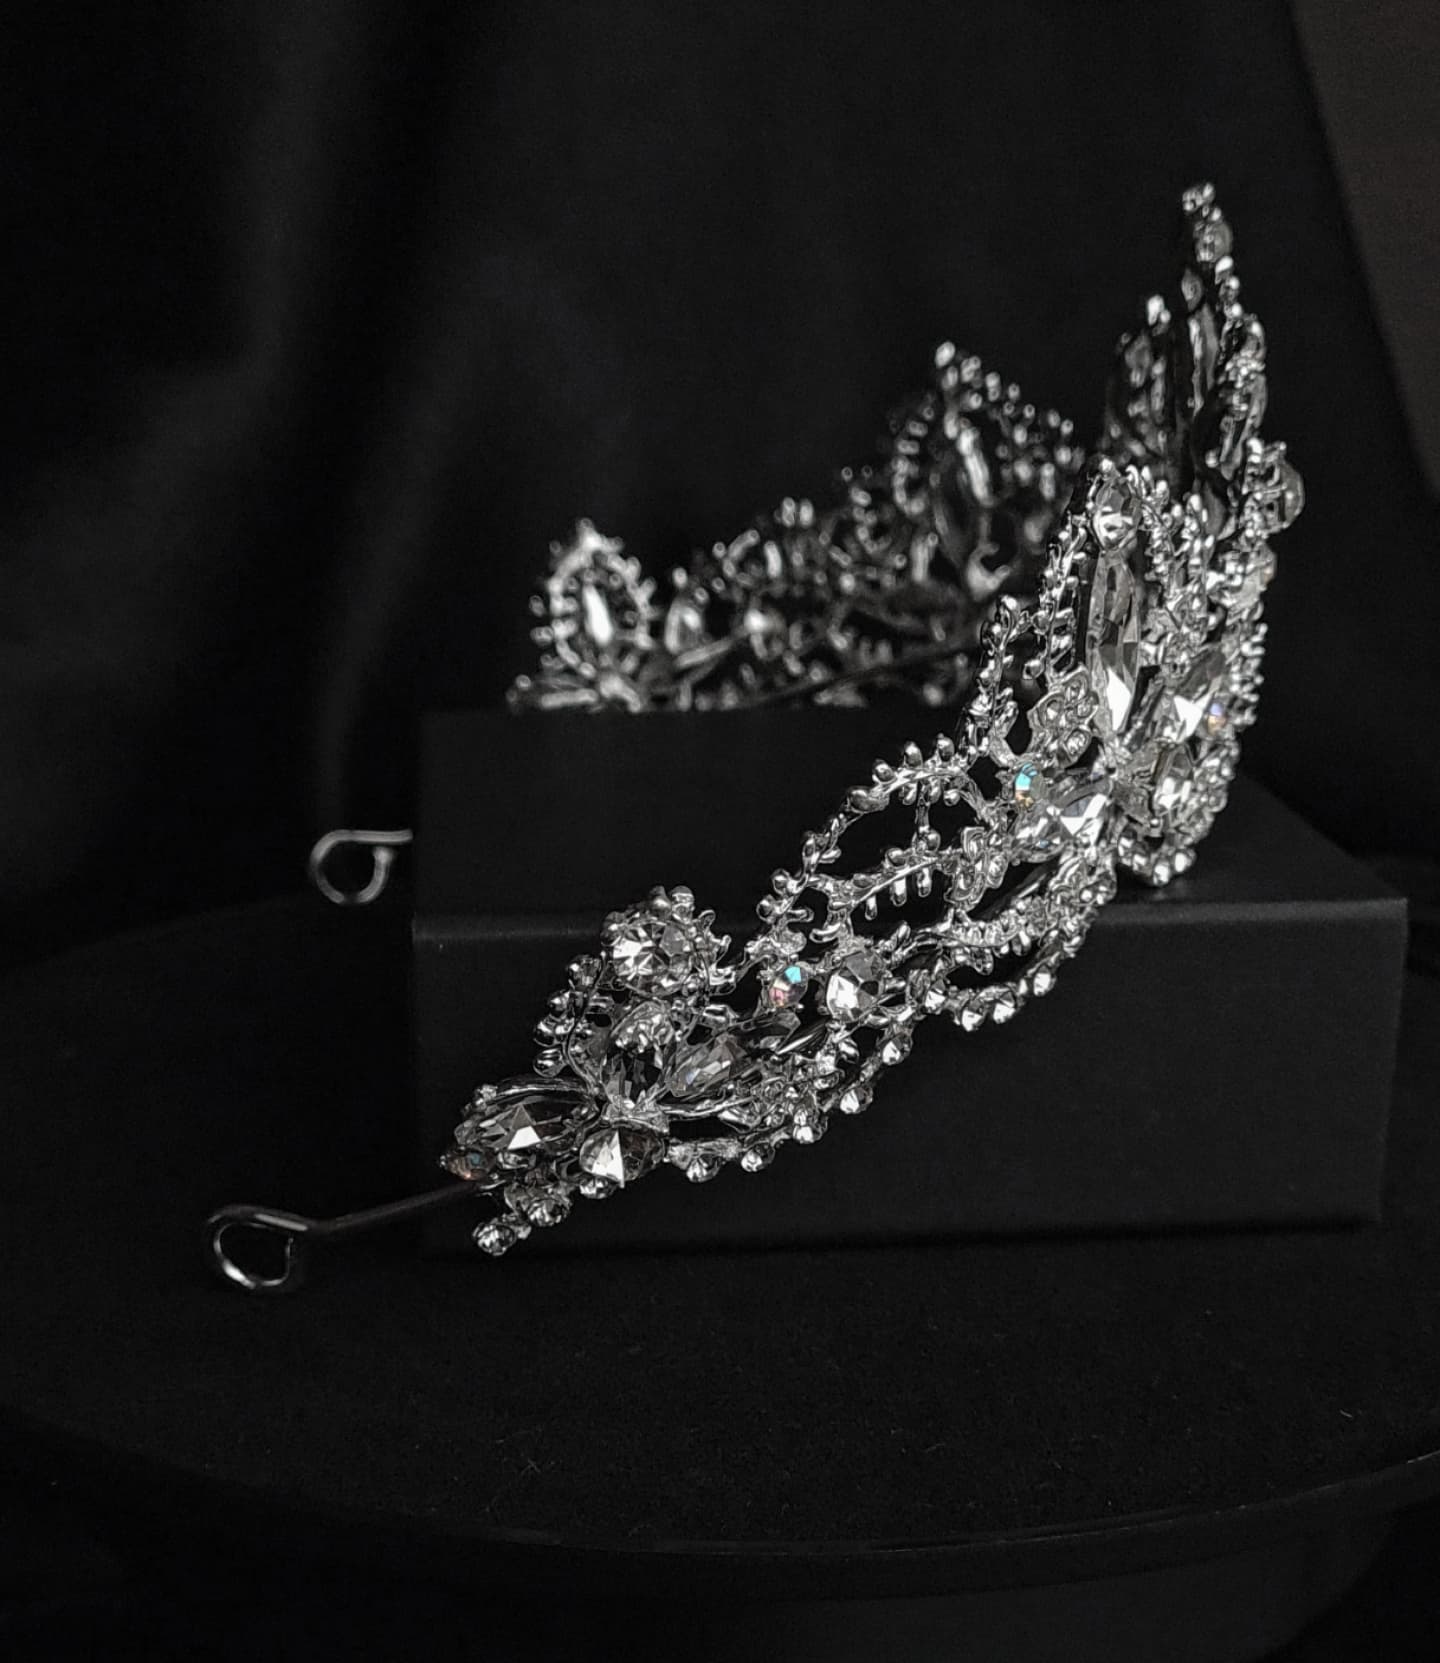 side view of  A tiara with rhinestones on a black box. The tiara is made of silver and features a delicate design with cascading rhinestones. The rhinestones are clear and sparkling. The tiara is sitting on top of a black box.